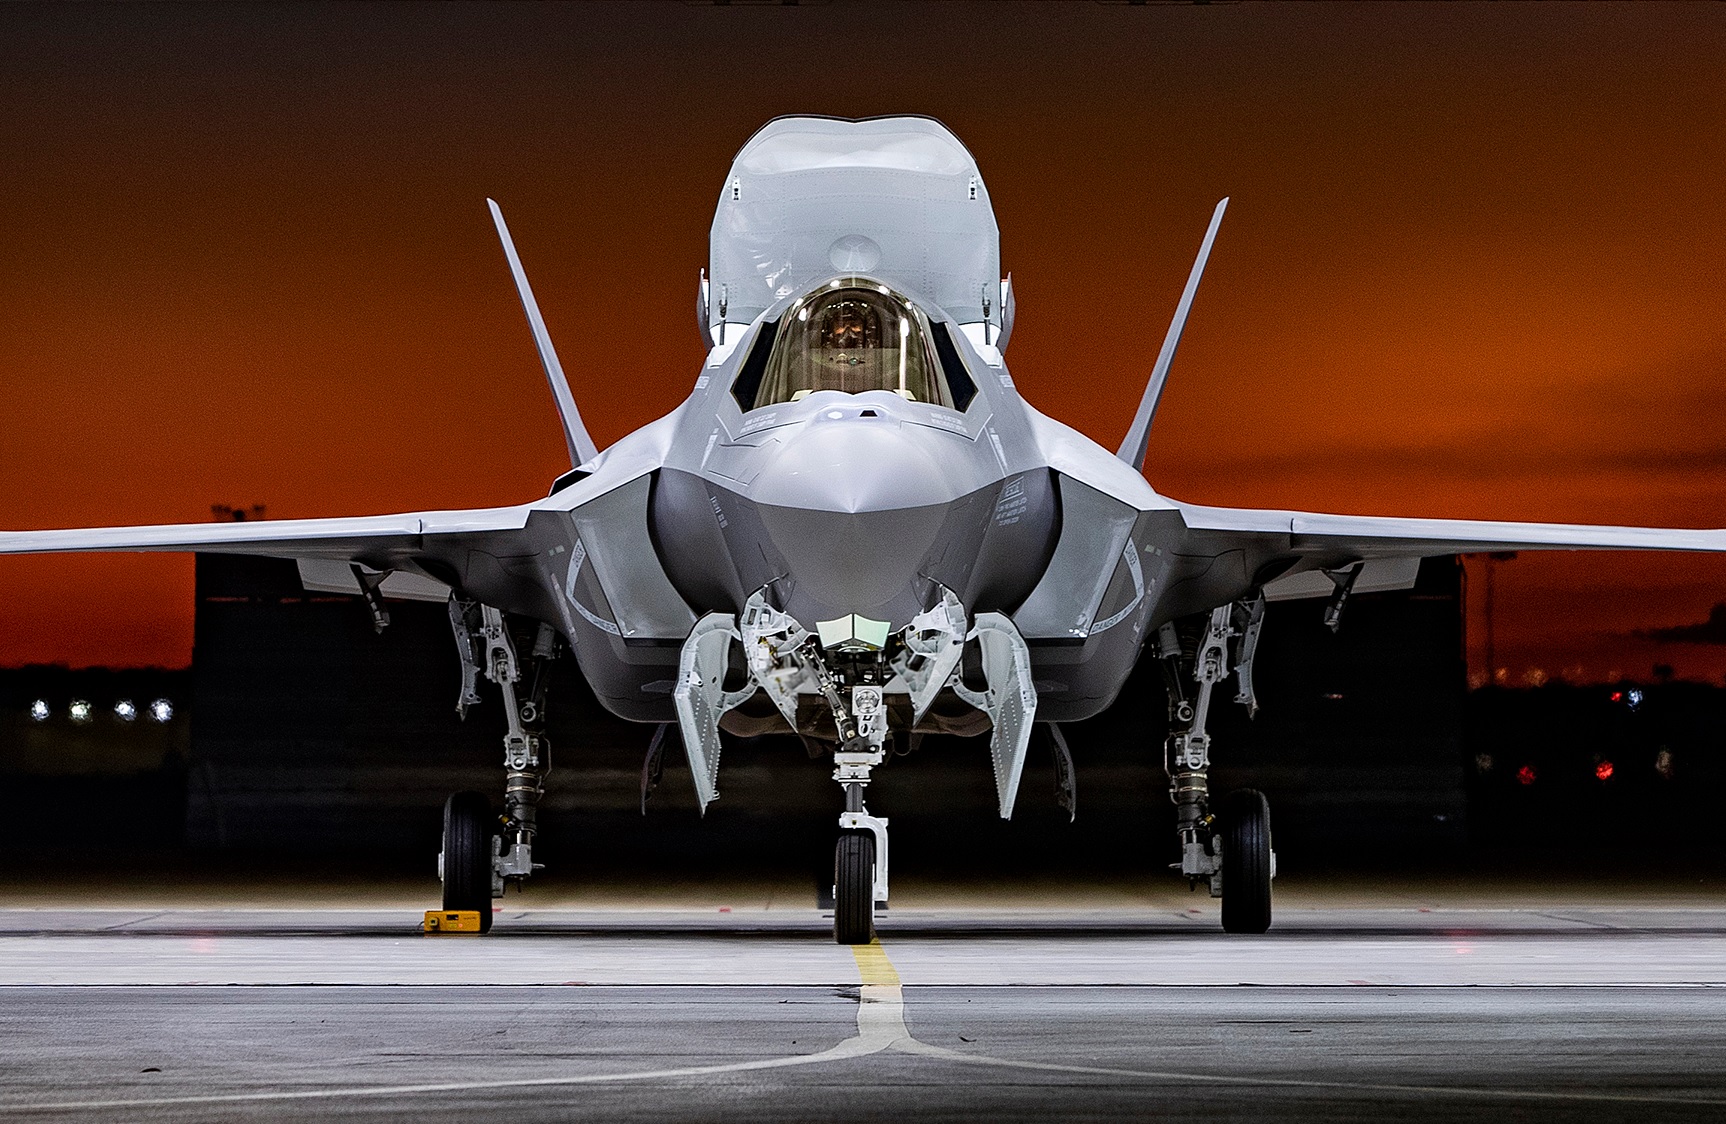 The UK’s fleet of cutting-edge F-35 Lightning stealth jets will be maintained and supported in a new £161 million contract, ensuring they remain ready for combat operations across the globe.